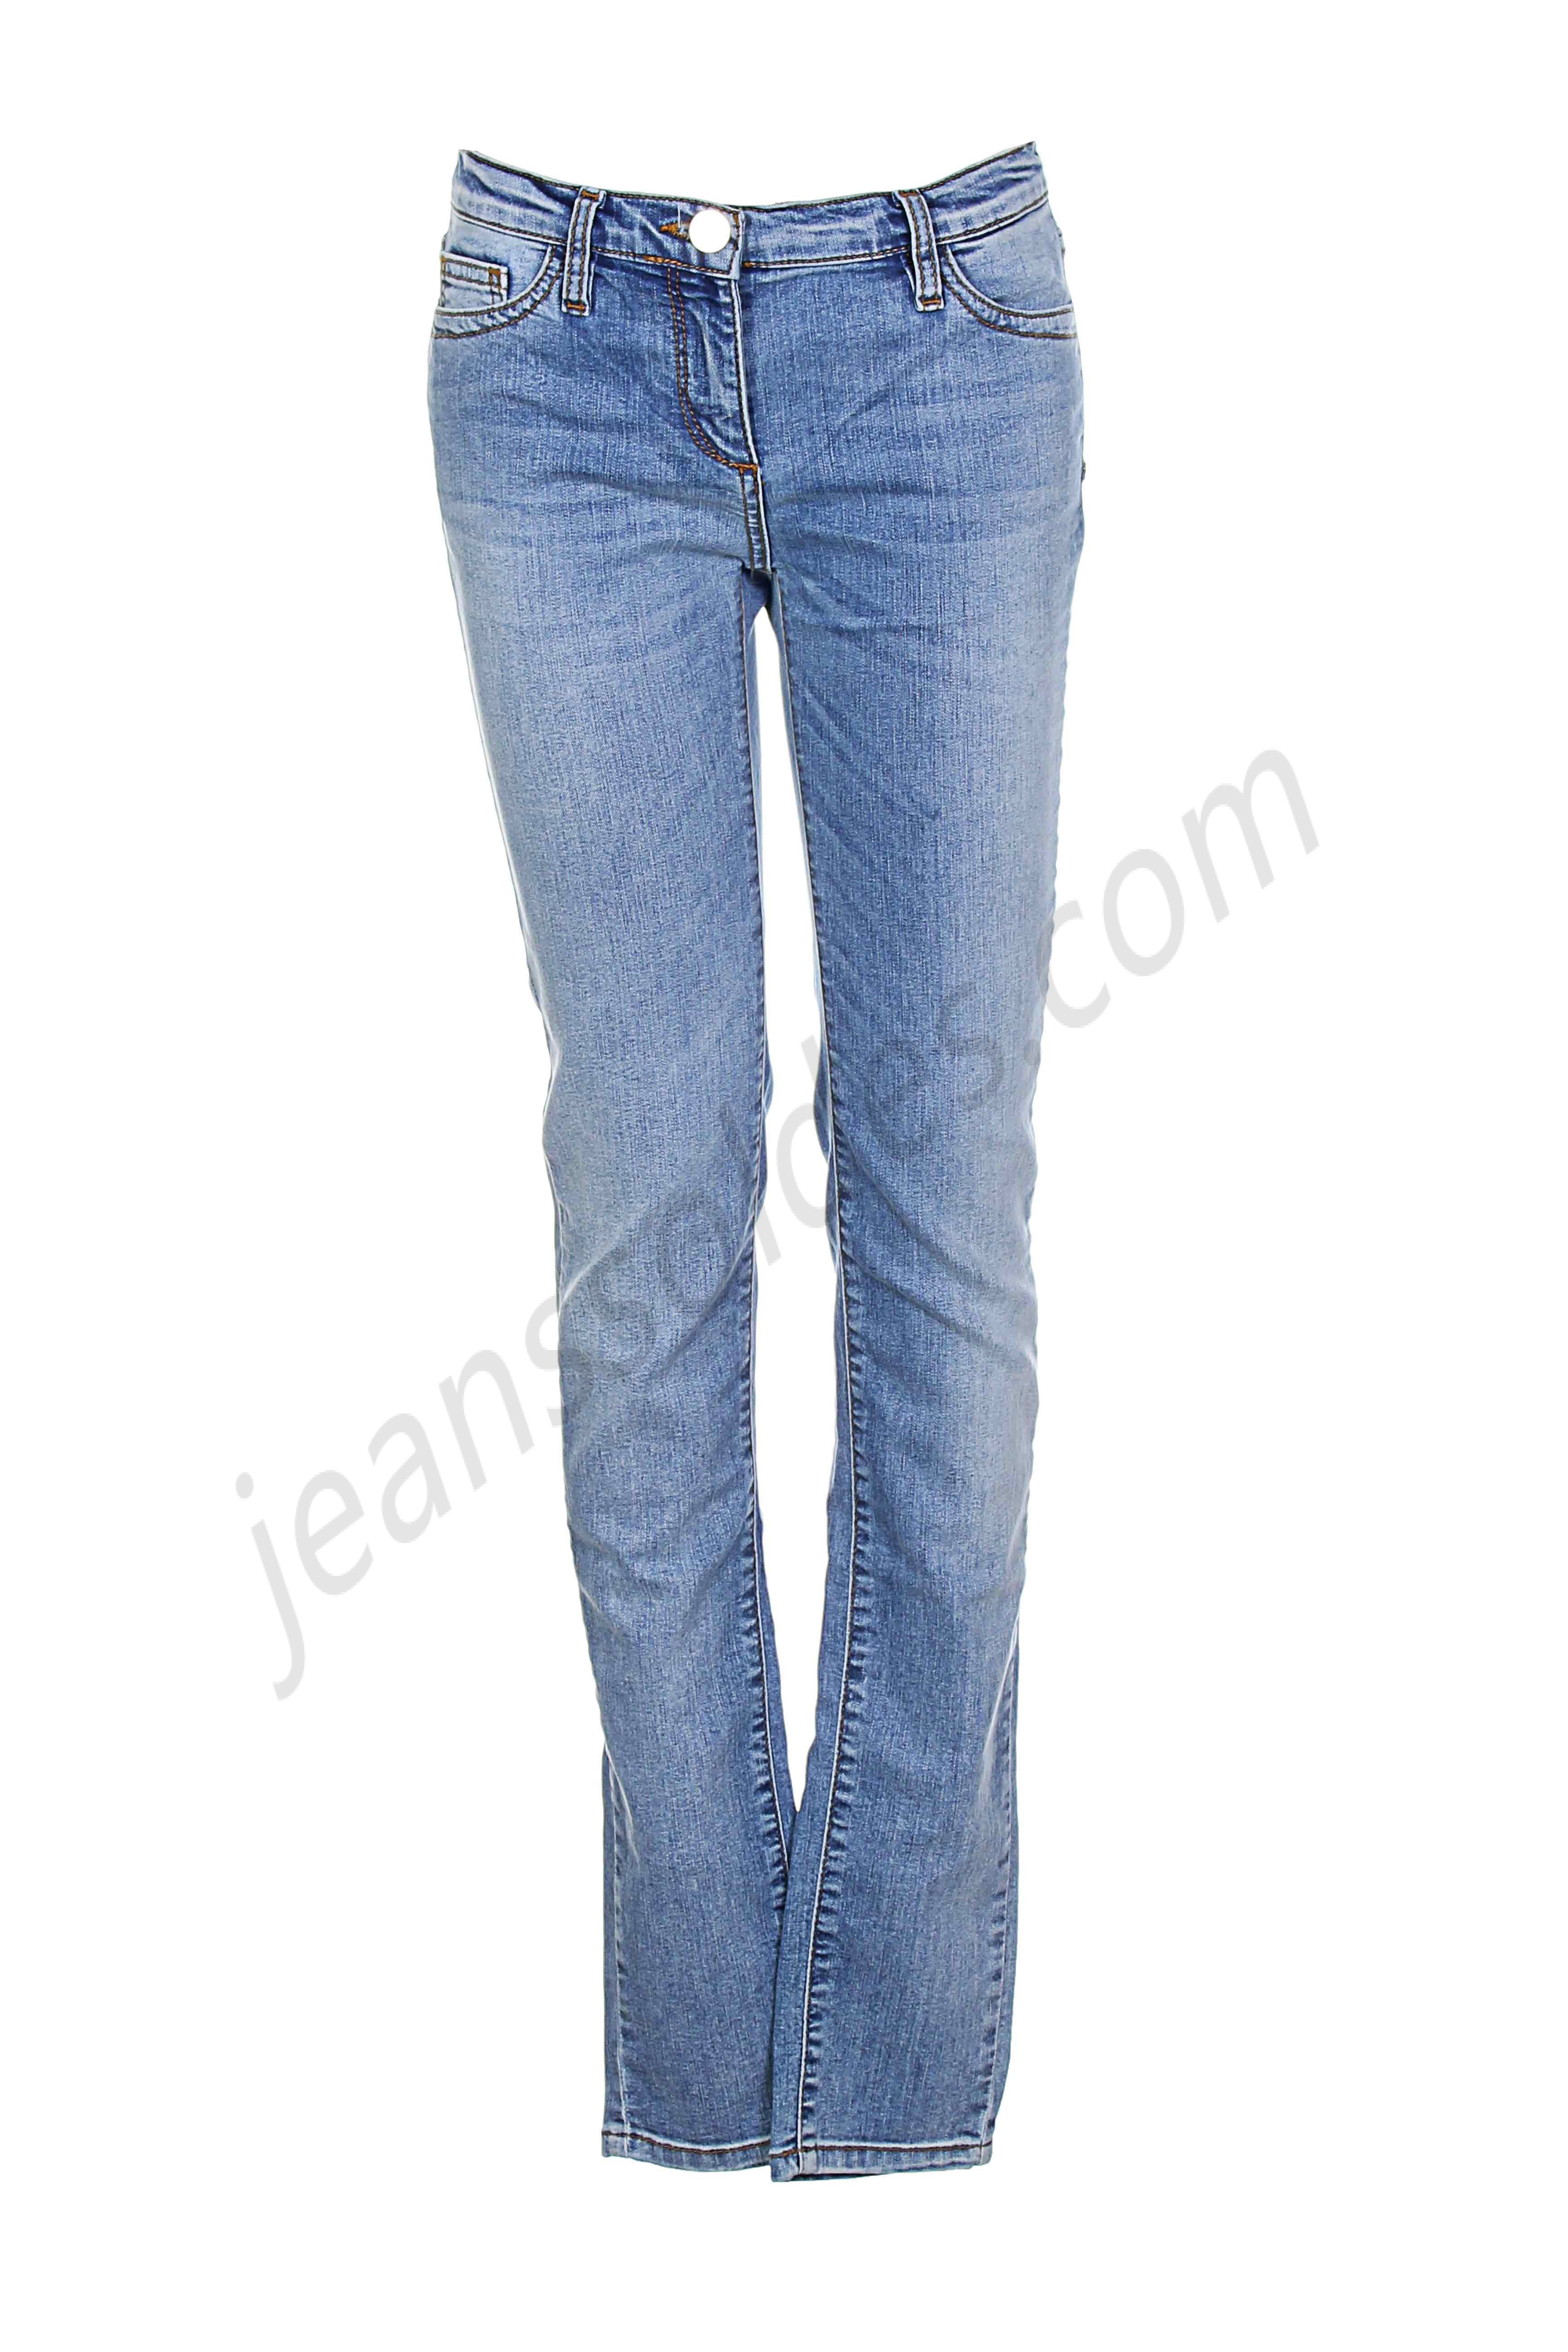 who's who-Jeans coupe slim prix d’amis - who's who-Jeans coupe slim prix d’amis